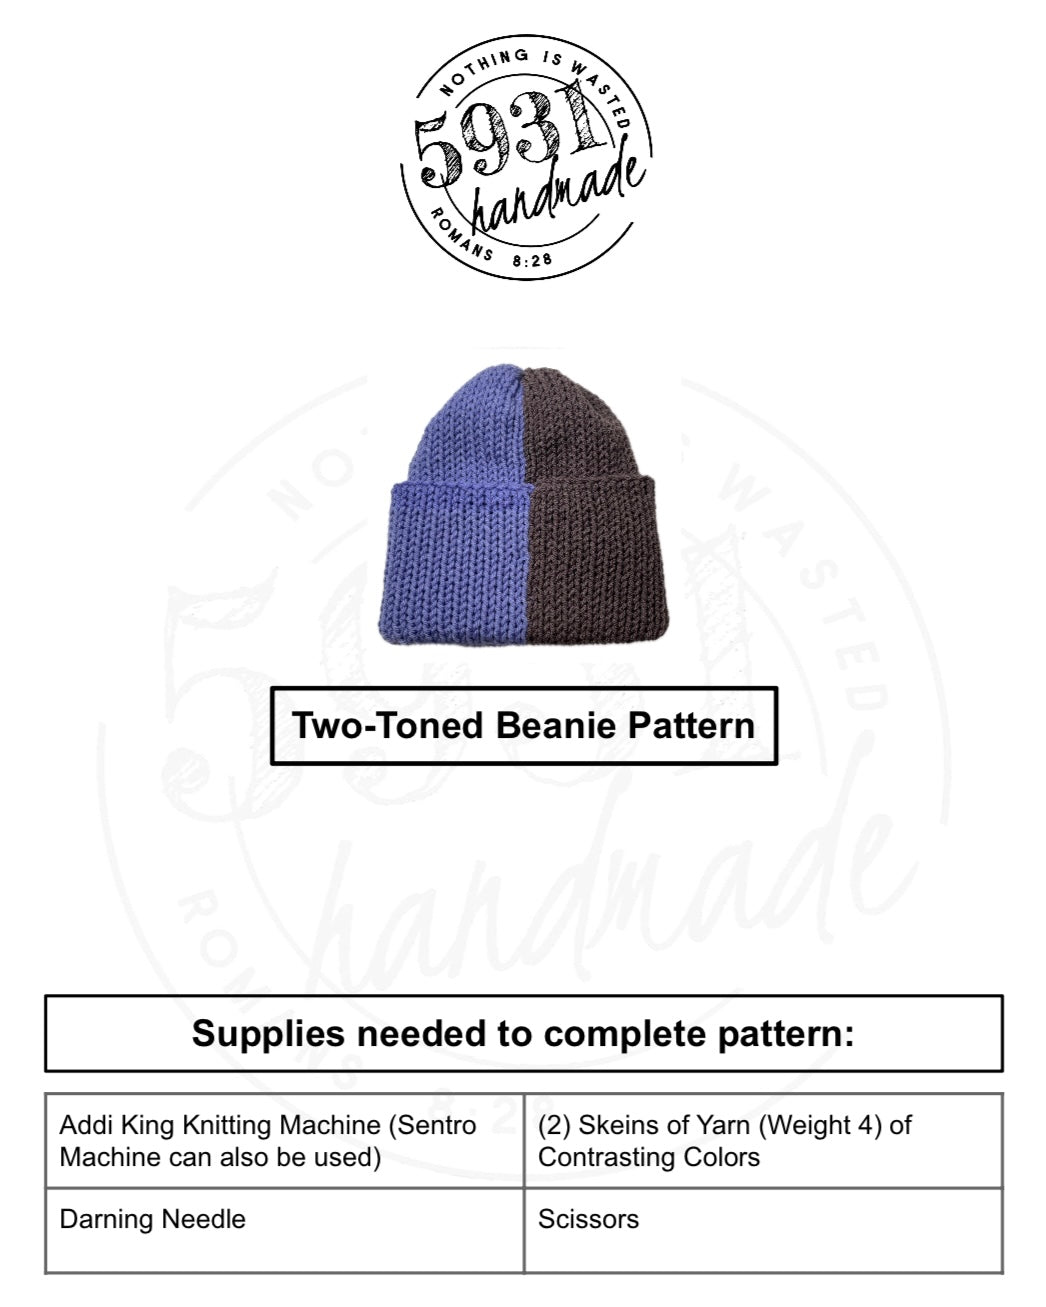 Two-Toned Beanie Pattern